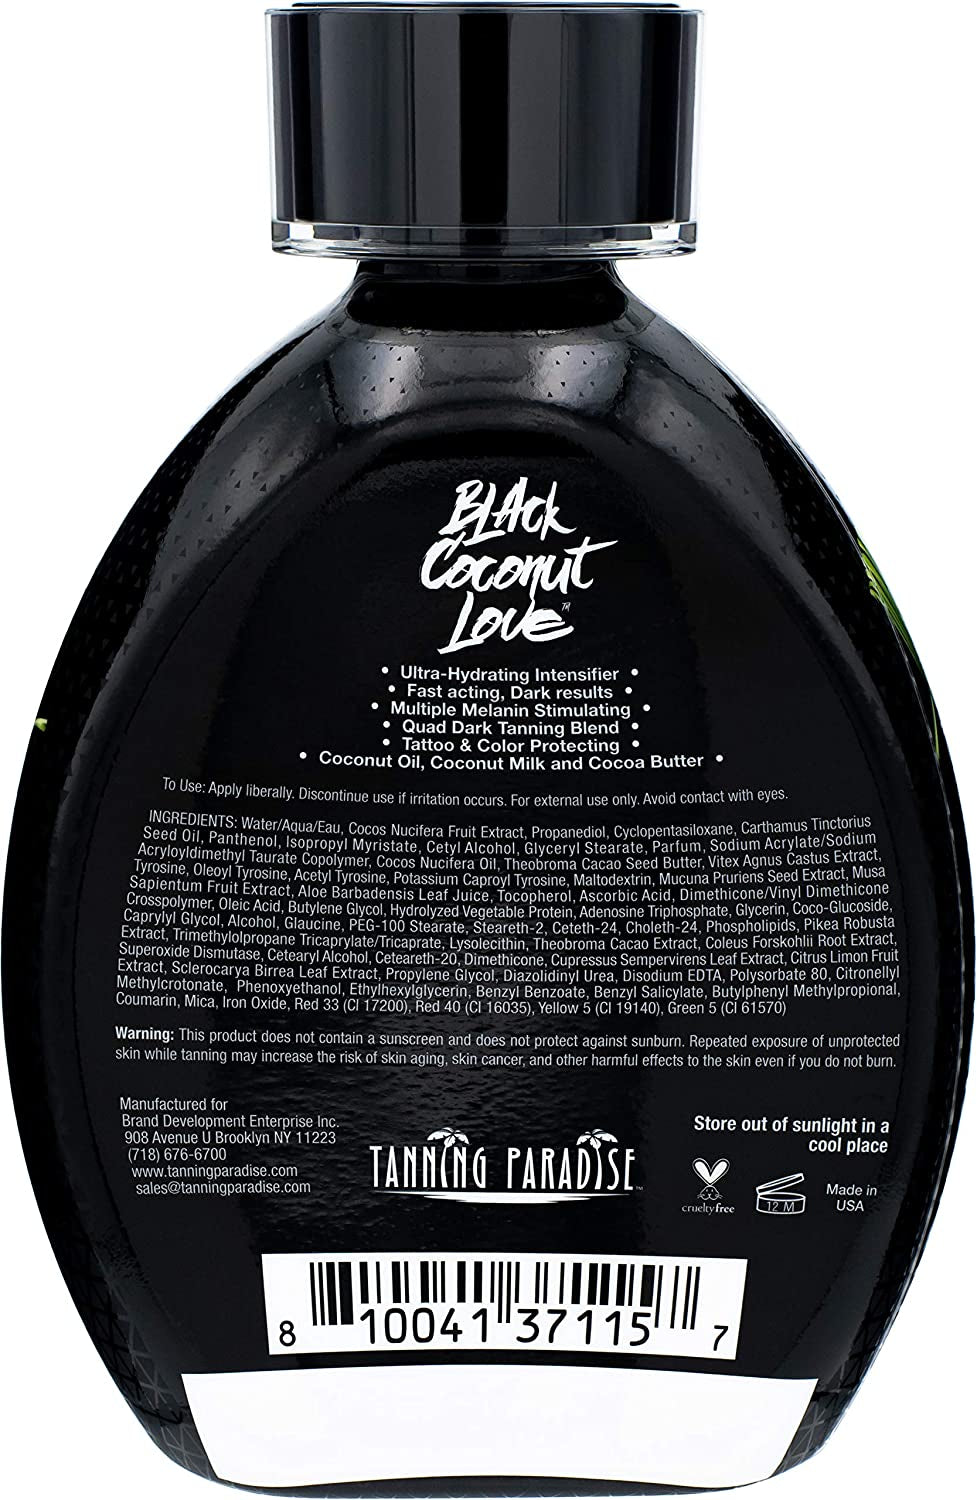 Black Coconut Love Tanning Lotion: Age-Defying, Tattoo Protecting, Ultra Hydrating - 13.5oz